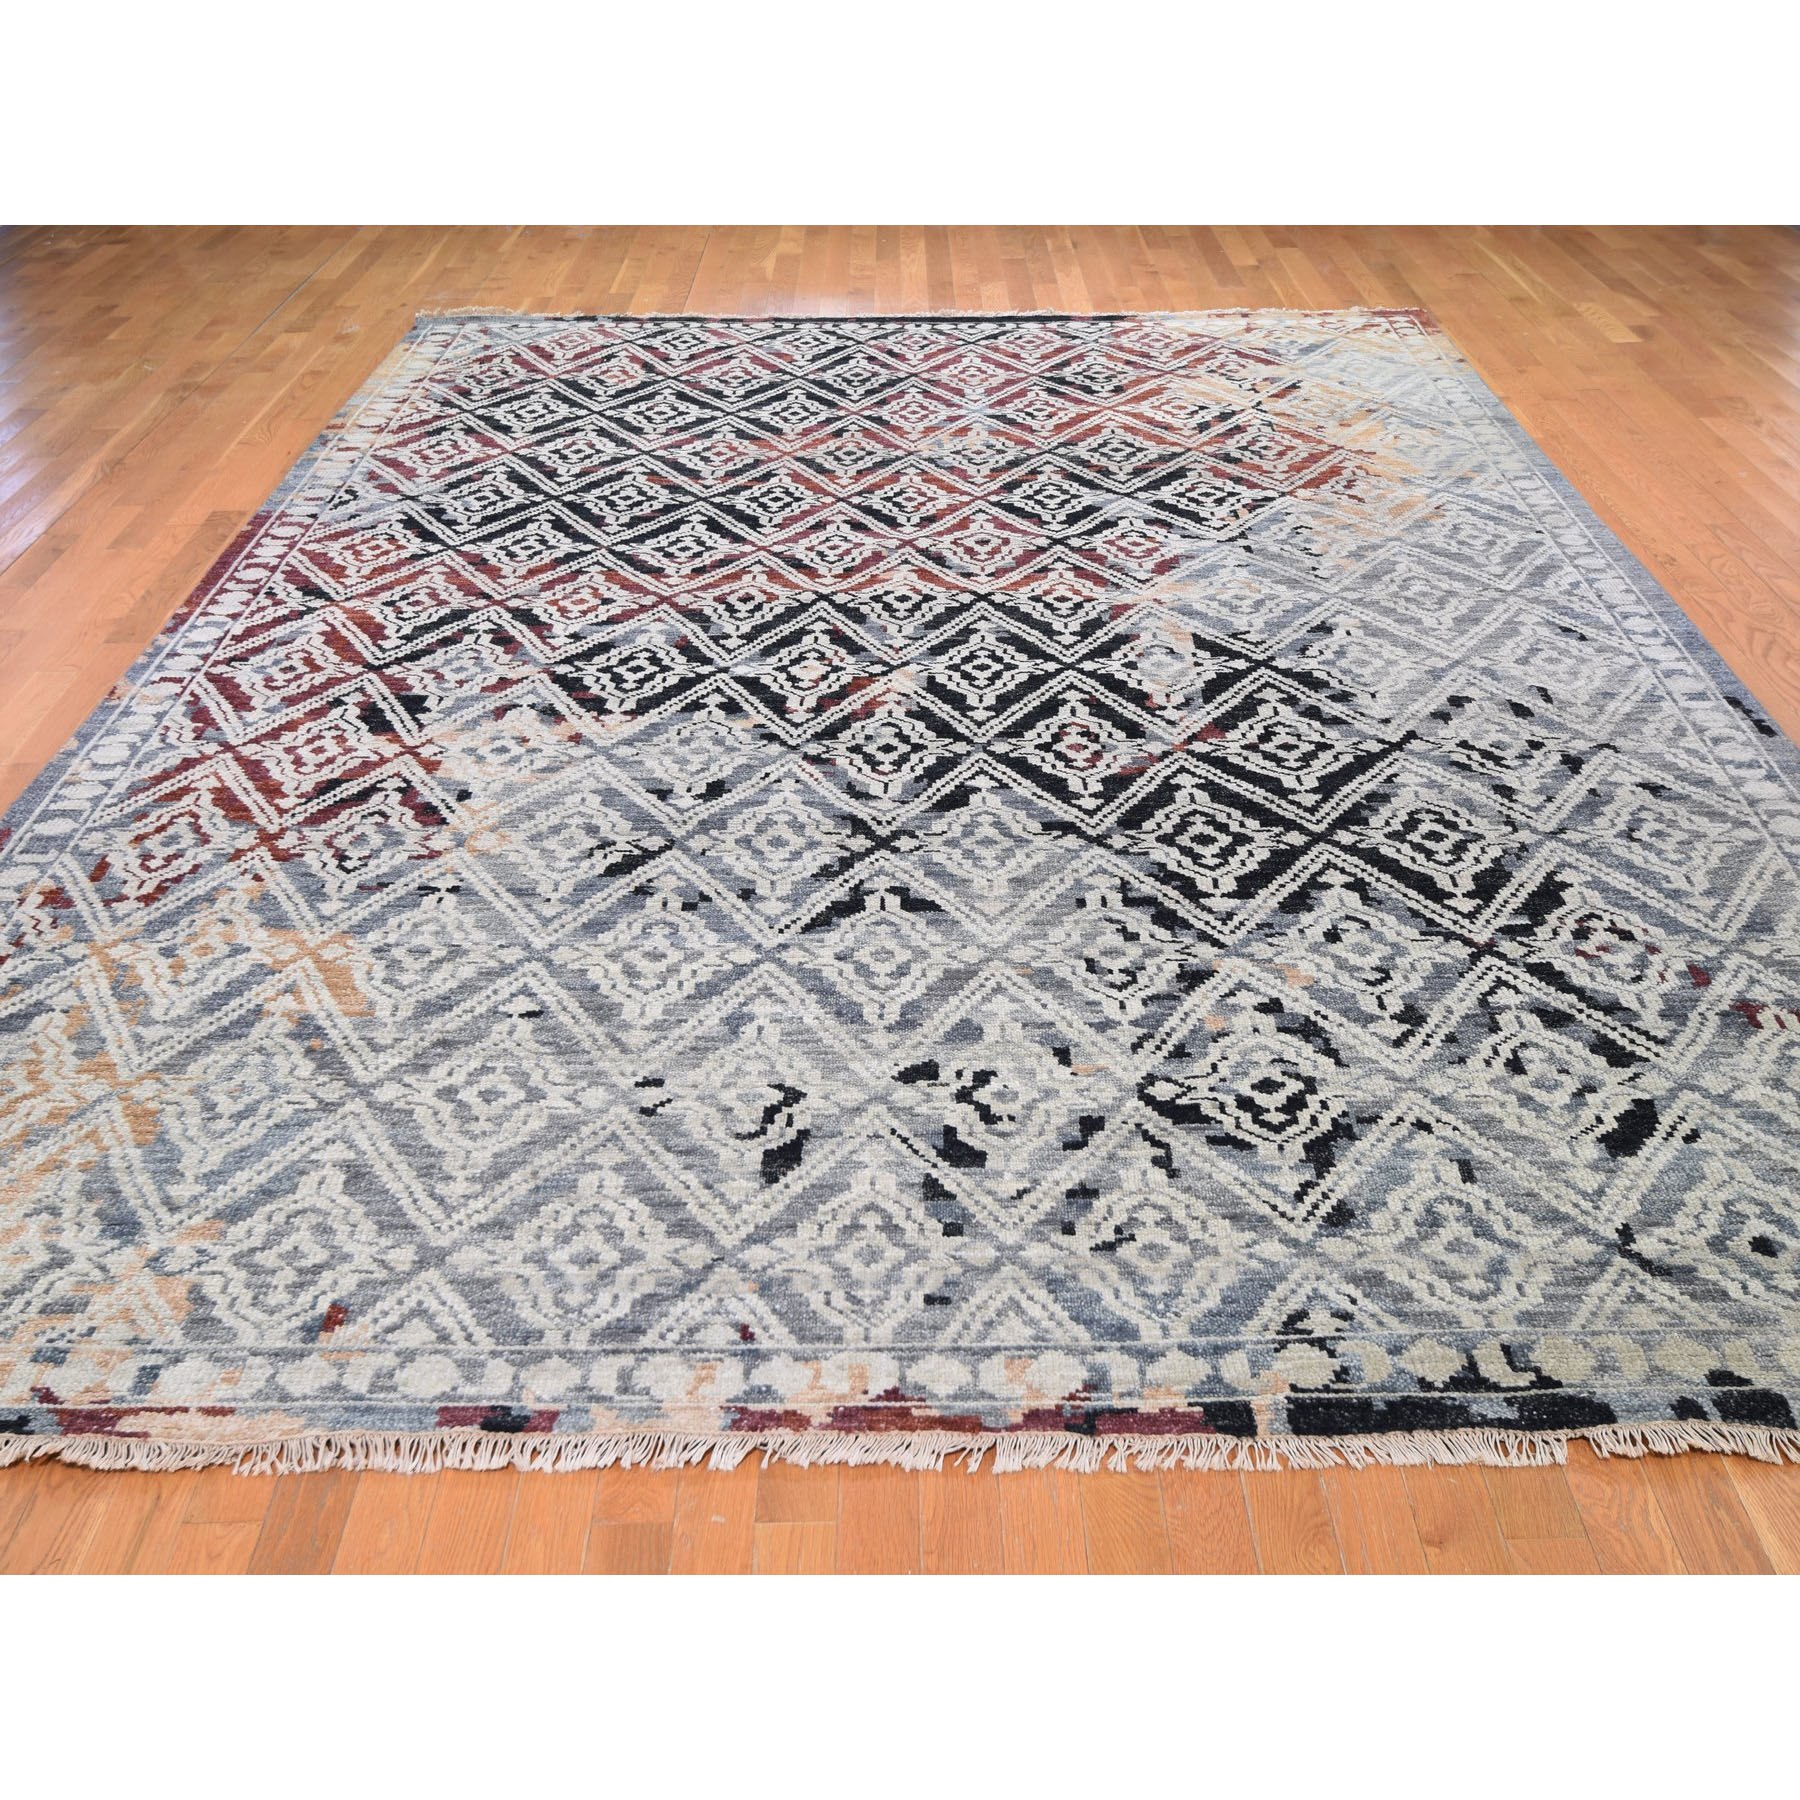 9-10 x14- Supple Collection Erased Repetitive Mughal Design Hand Knotted Oriental Rug 